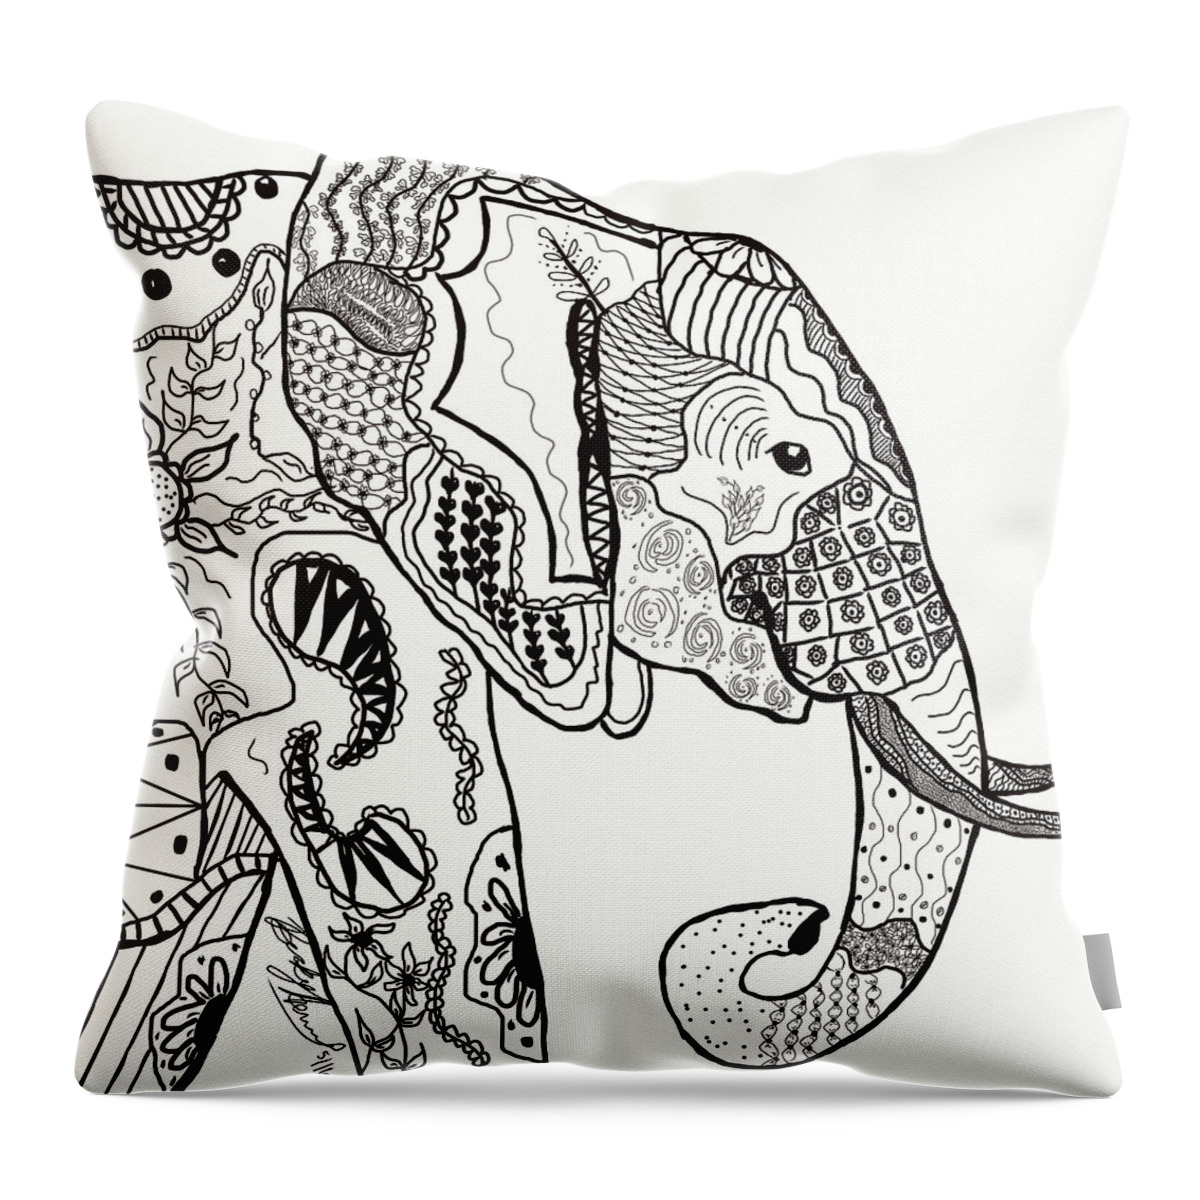 Zentangle Throw Pillow featuring the drawing Zentangle Elephant by Becky Herrera